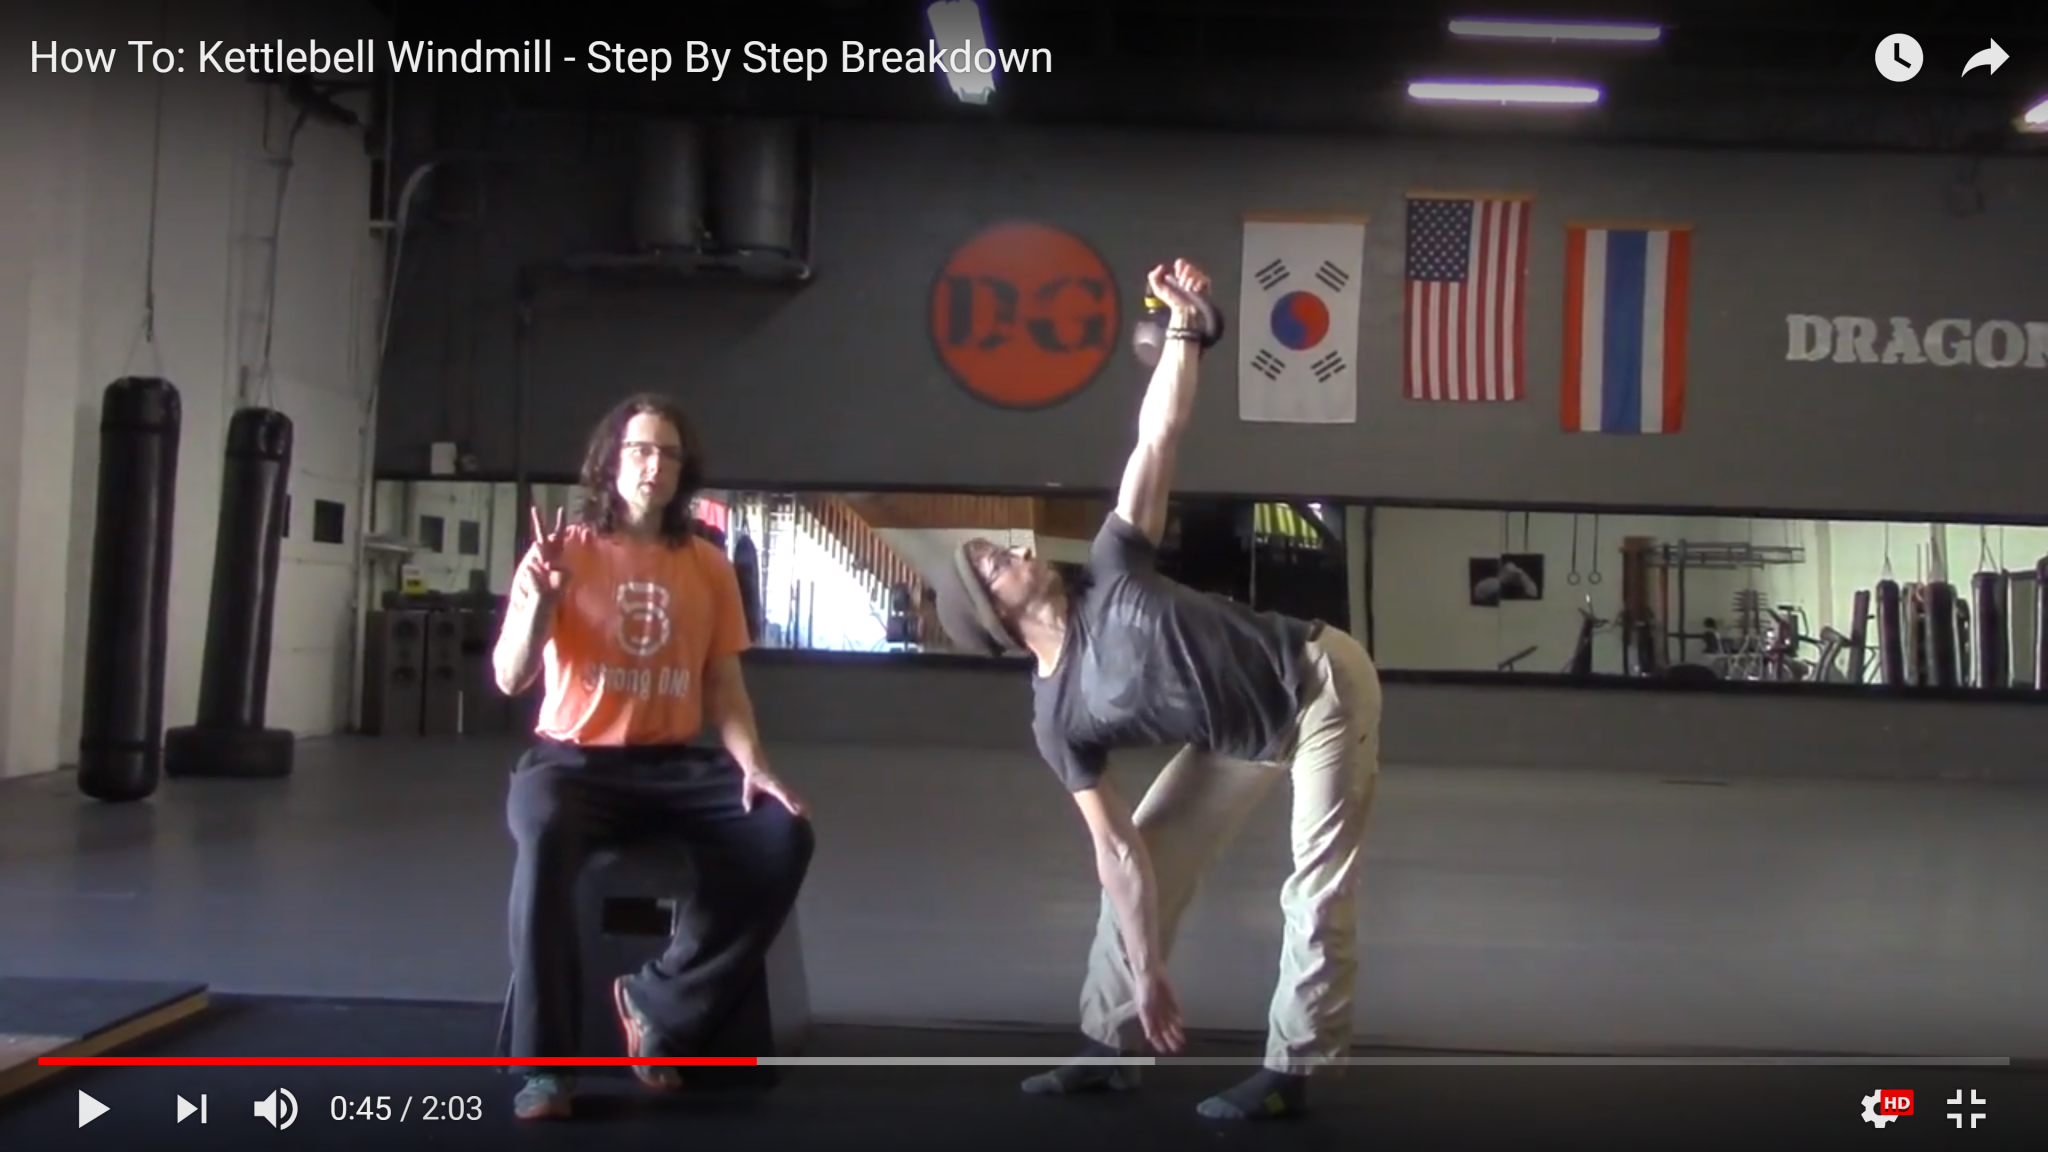 how to kettlebell windmill - step by step breakdown